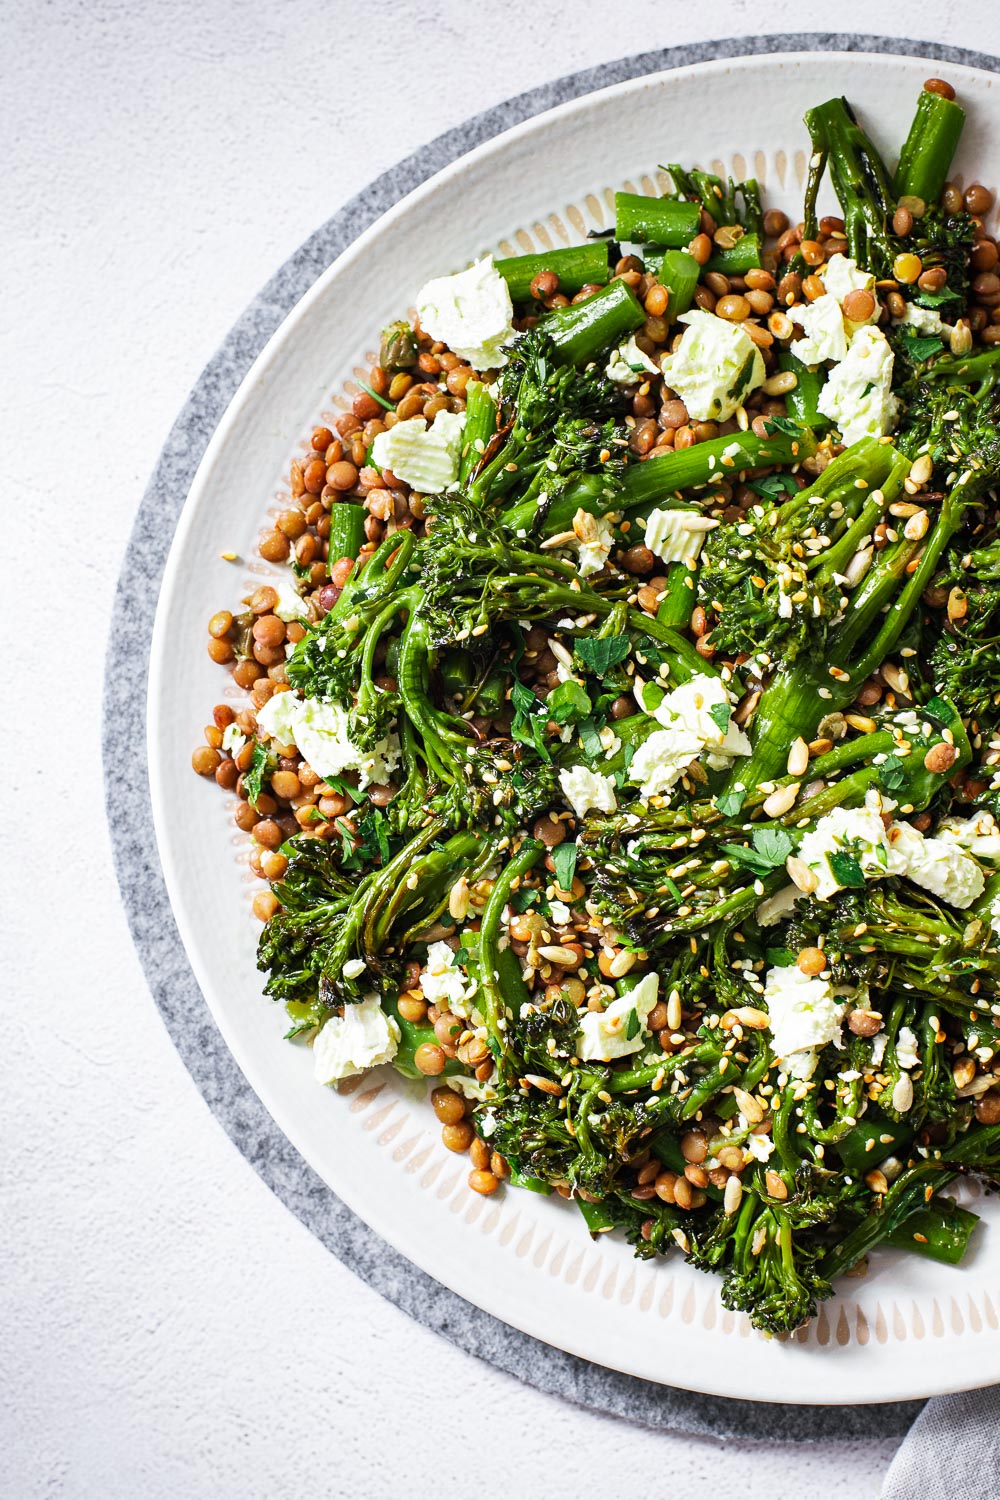 Charred broccolini and lentil salad with preserved lemon and caper dressing.